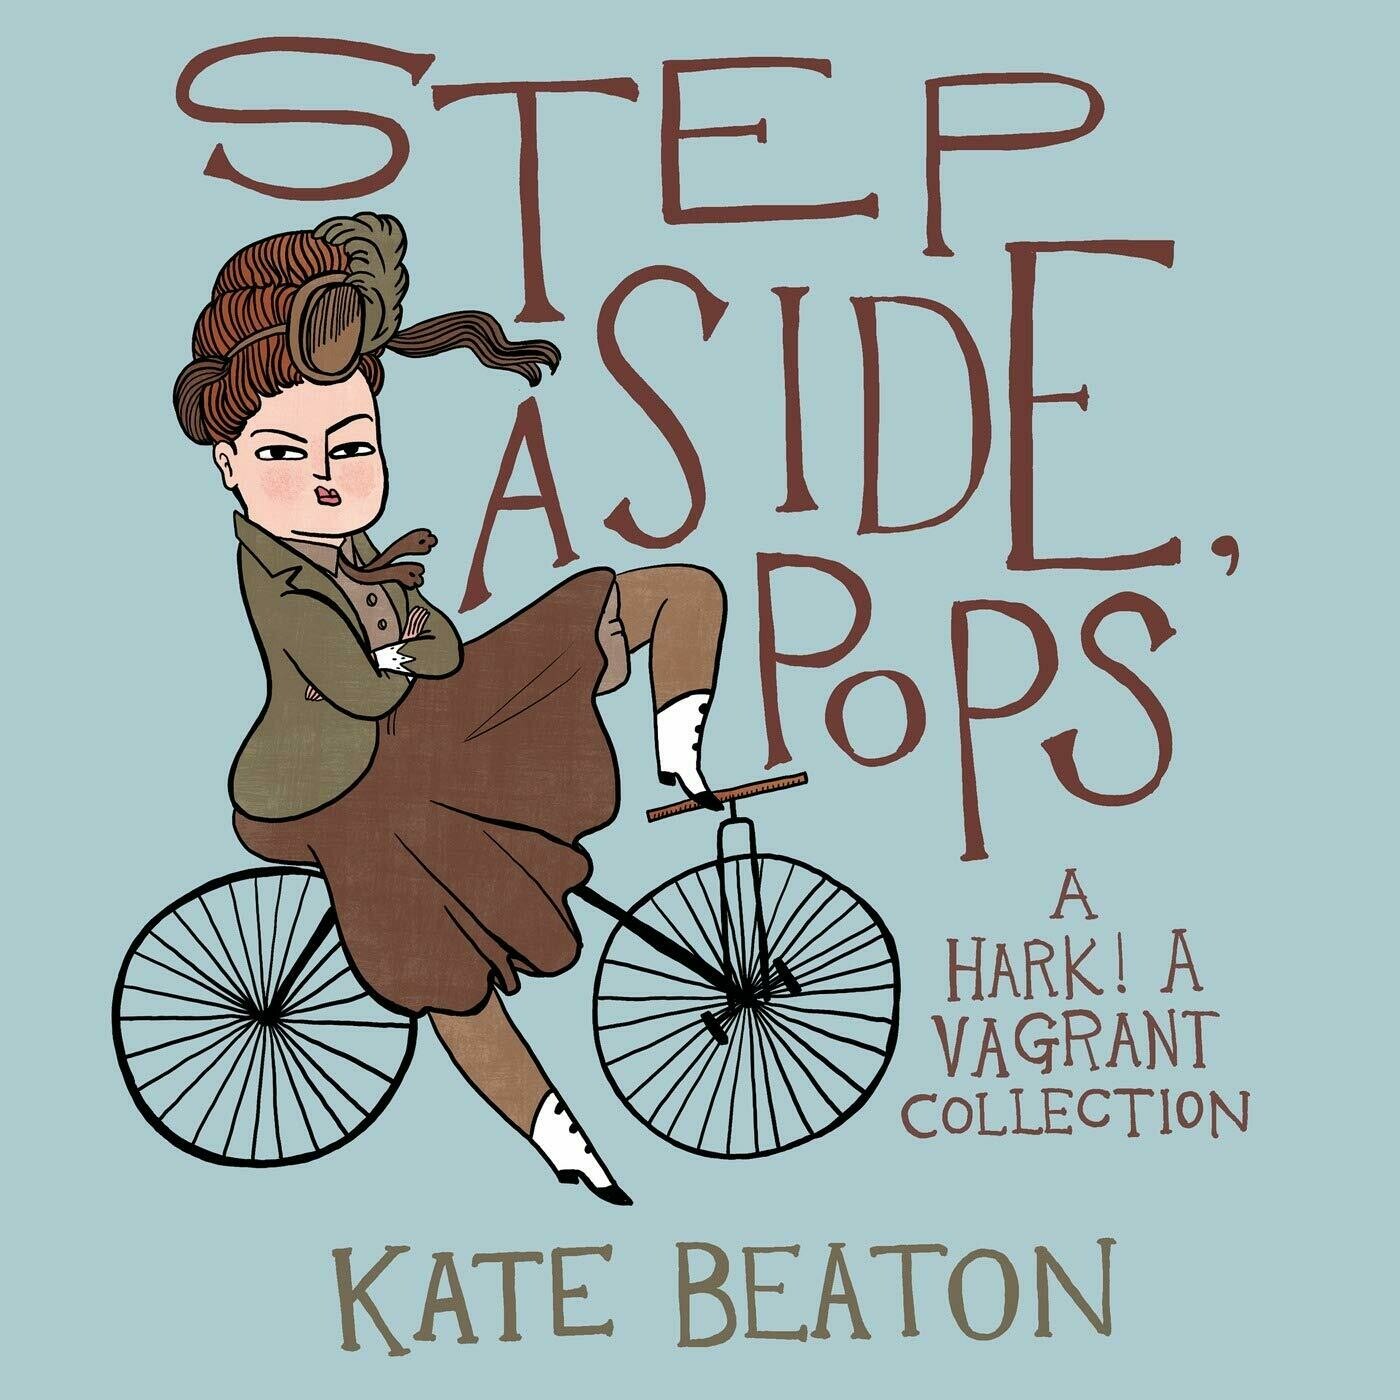 Kate Beaton: Step aside pops